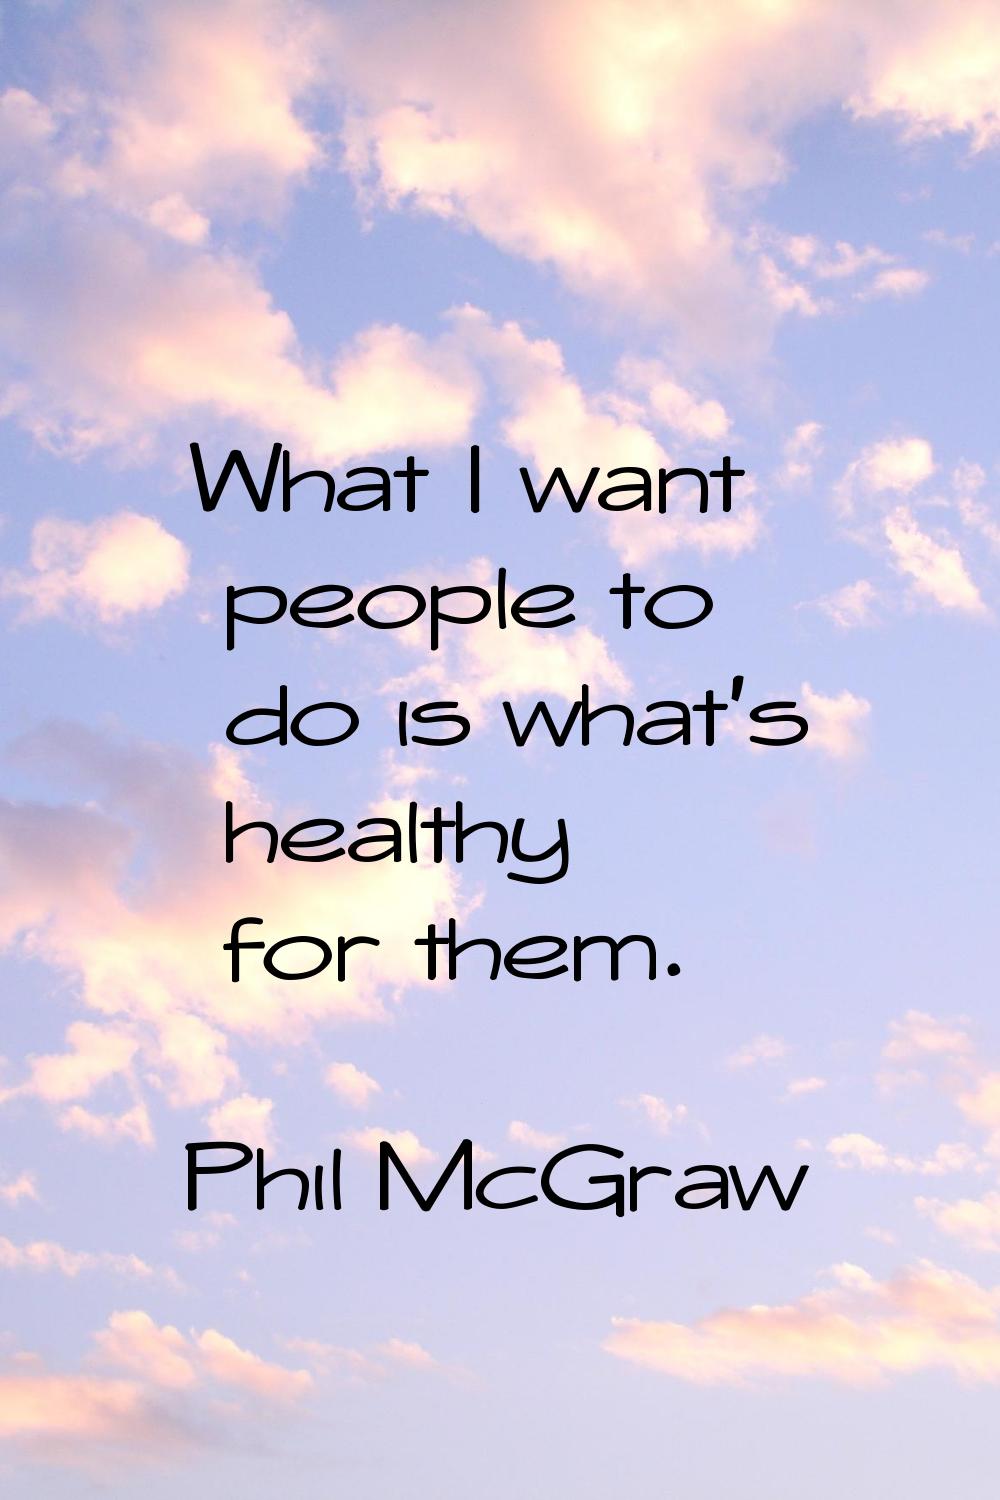 What I want people to do is what's healthy for them.